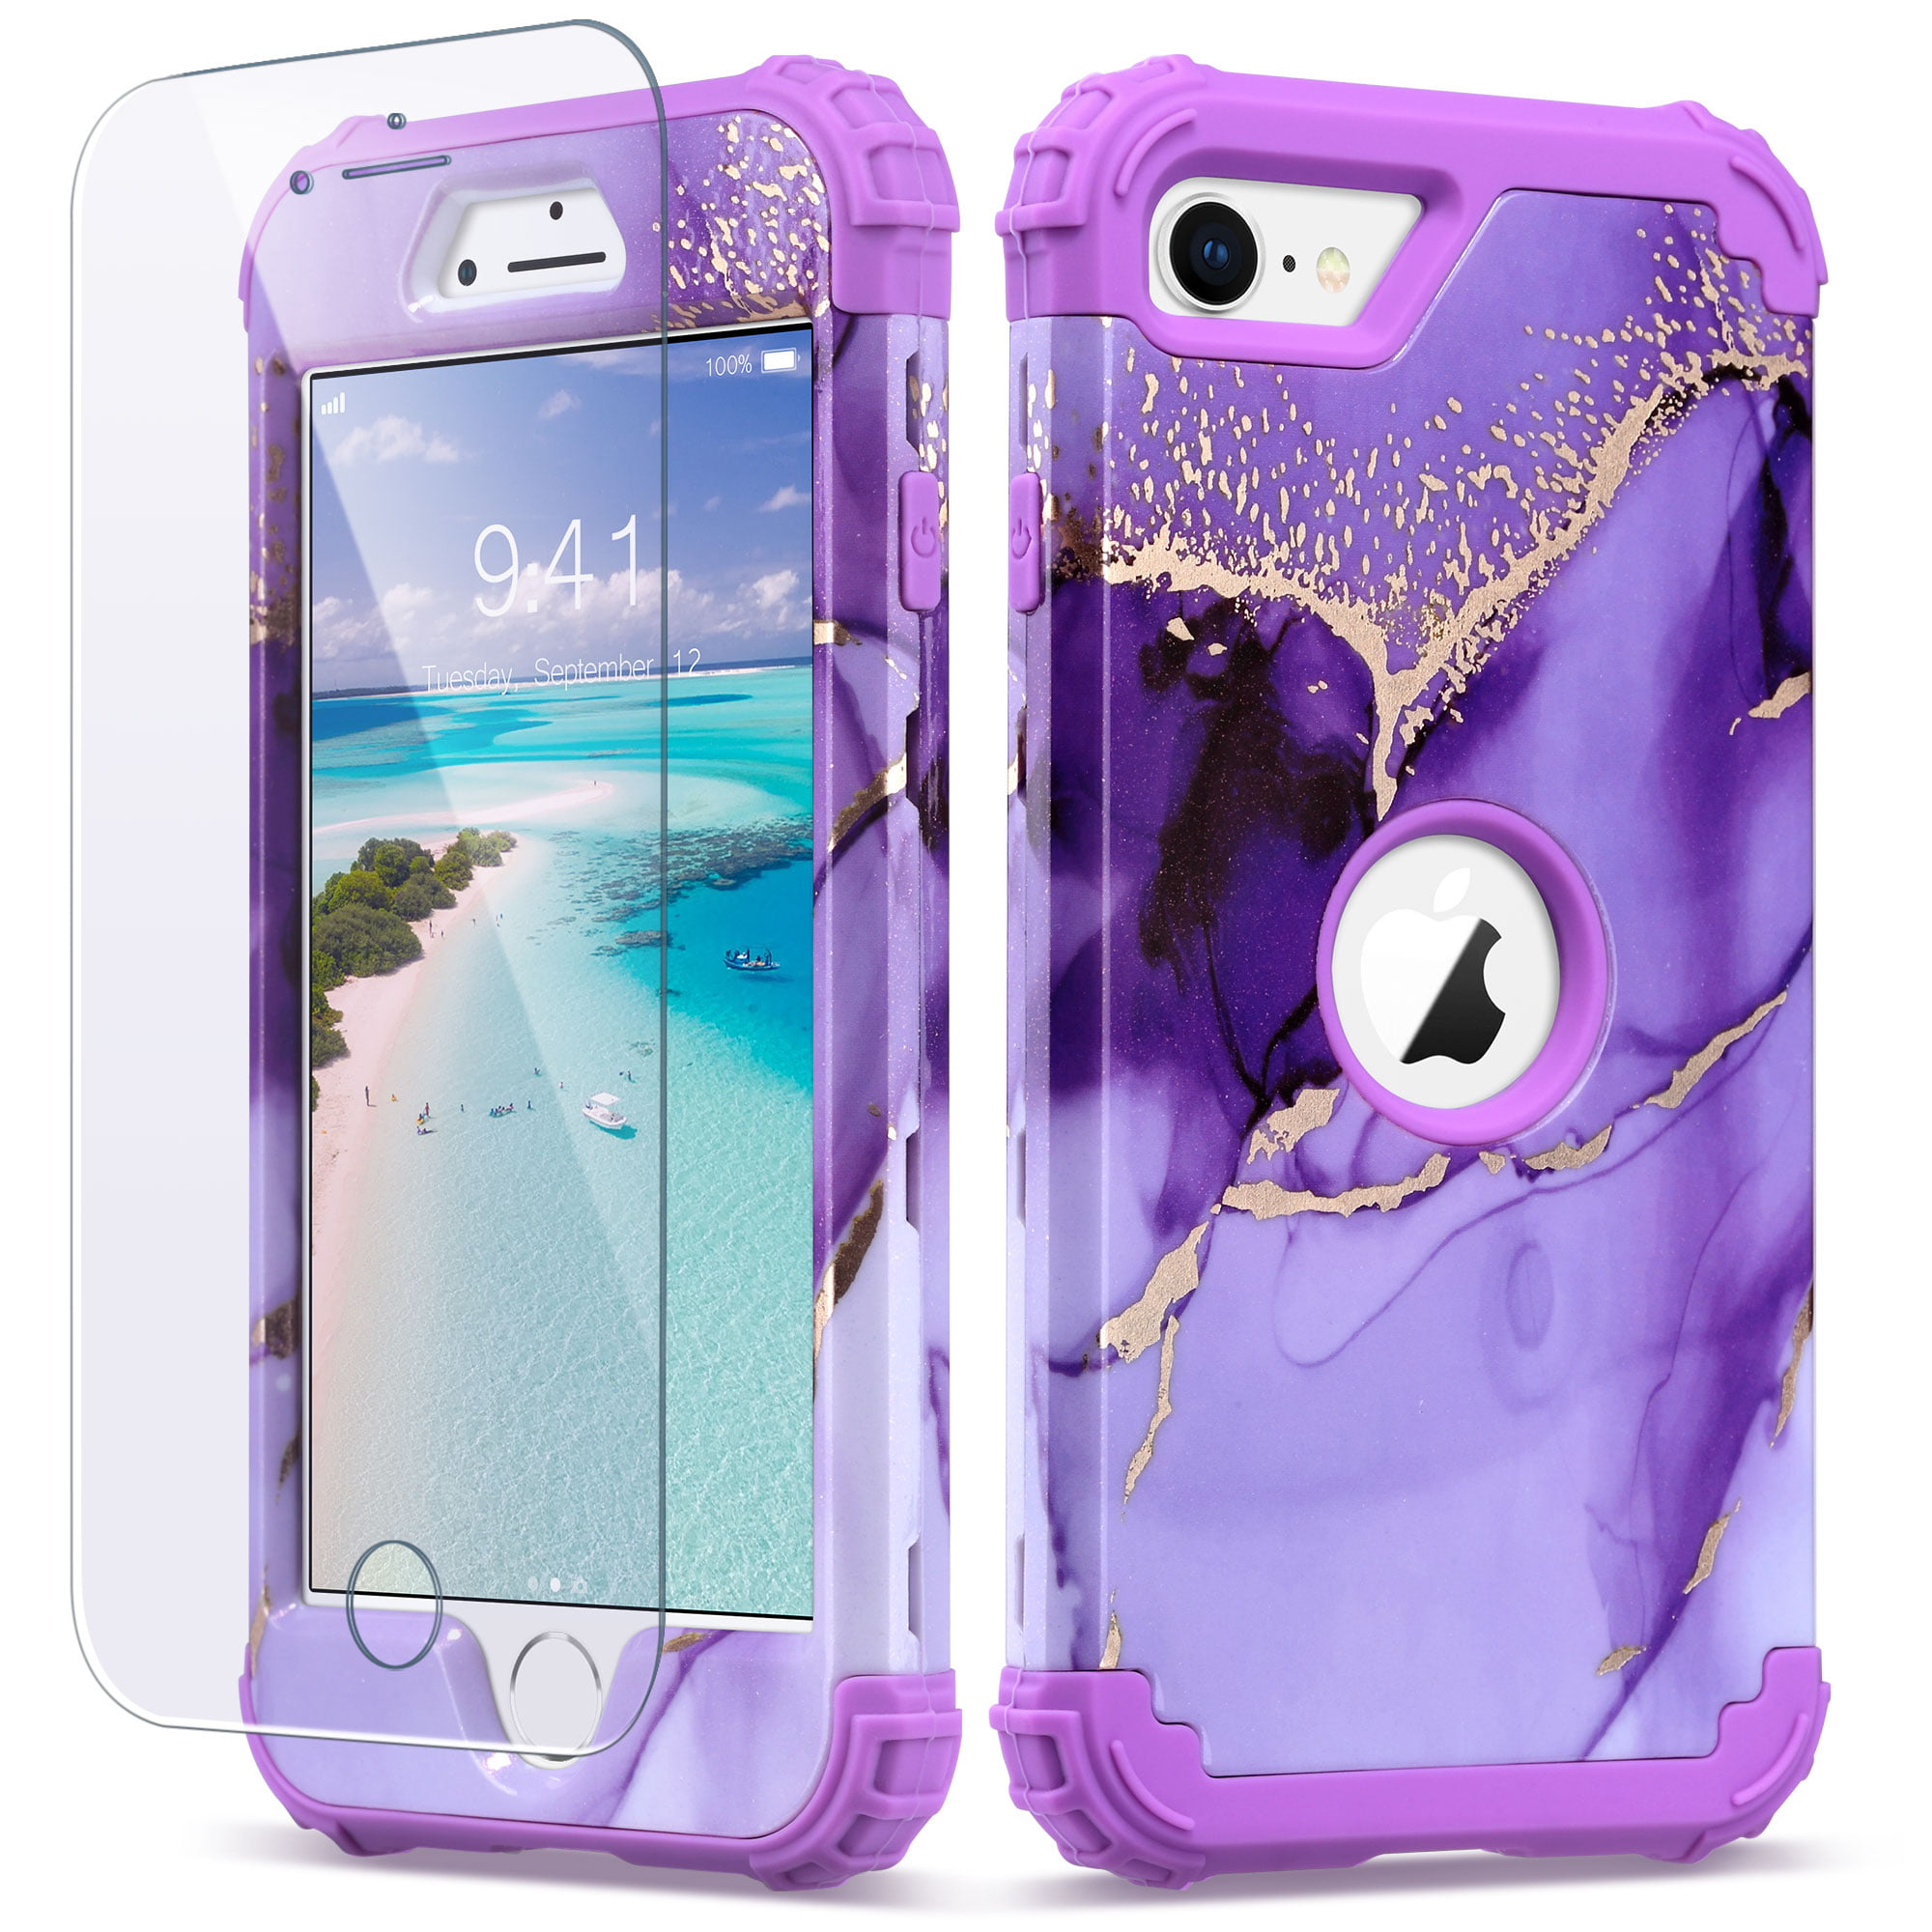 iPhone SE 2022 2020 Case With Screen Protector, iPhone 7 Case, iPhone 8 Case, ULAK Duty 3 Layer Shockproof Protective Phone Case for iPhone 7/8/SE 3rd 2nd Generation, Purple Marble - Walmart.com